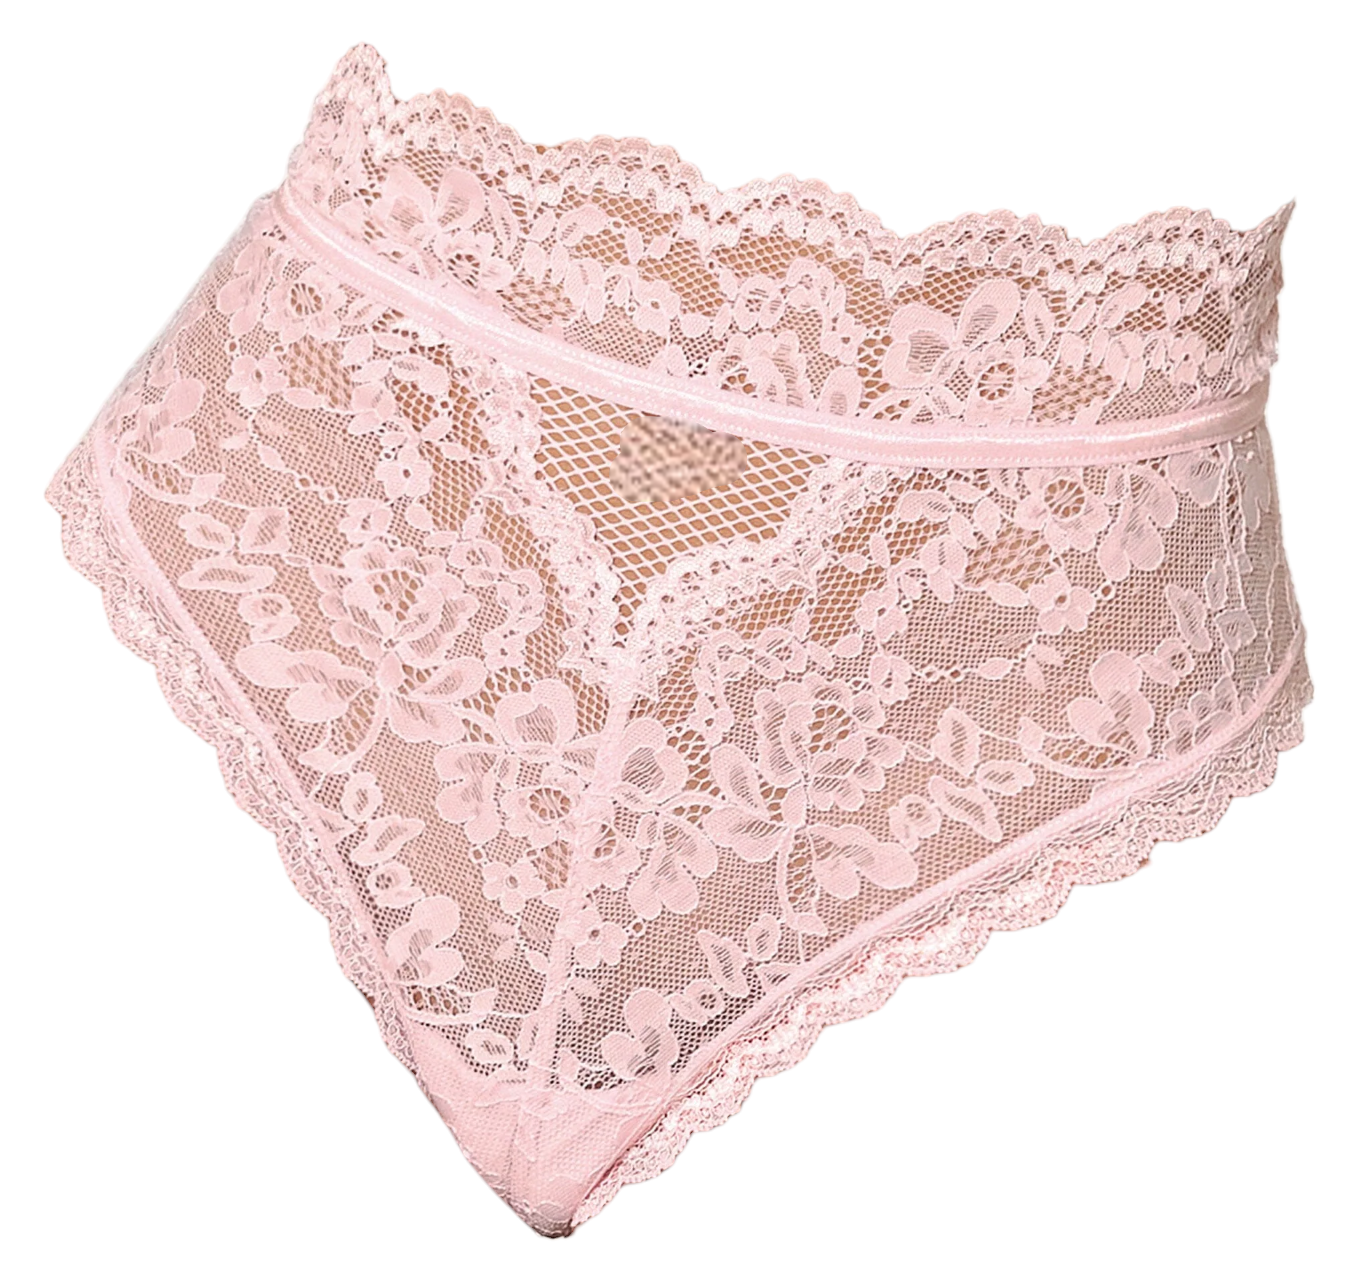 Dreamgirl High-Waist Scallop Lace Panty With Keyhole Back Pink